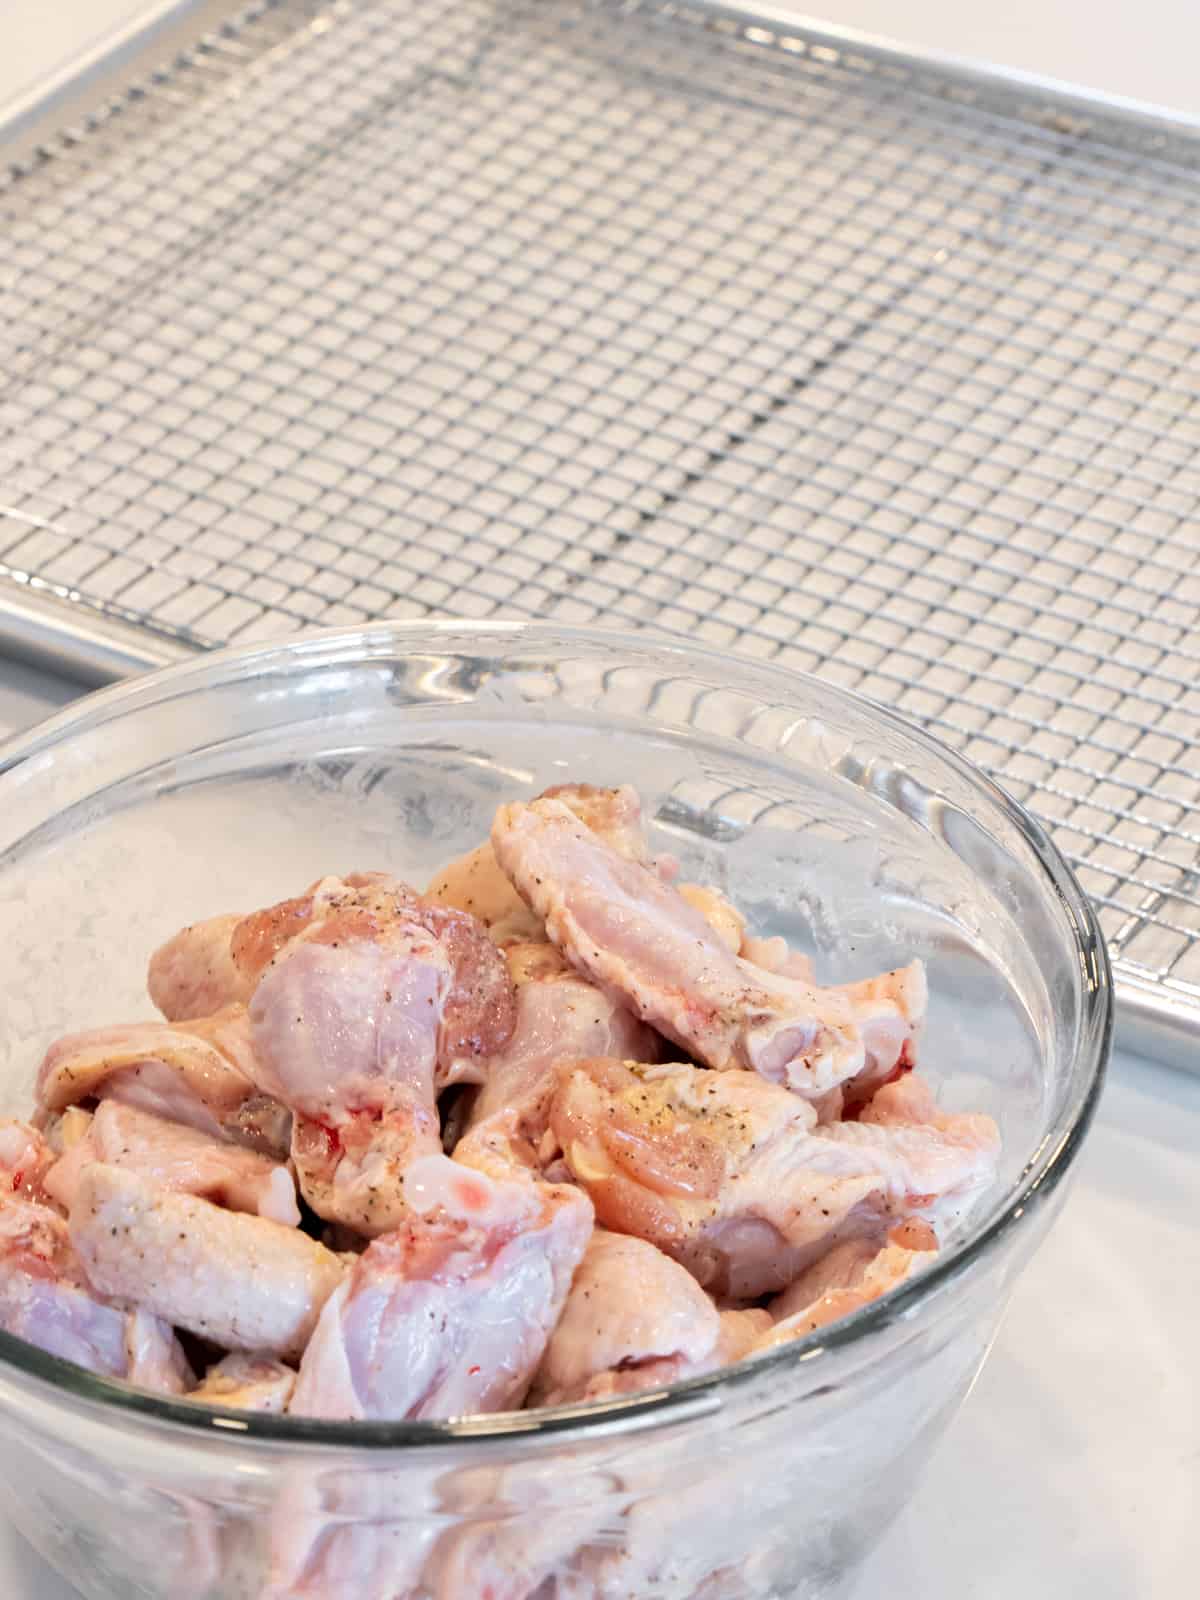 A bowl of raw chicken wings next to a baking sheet.